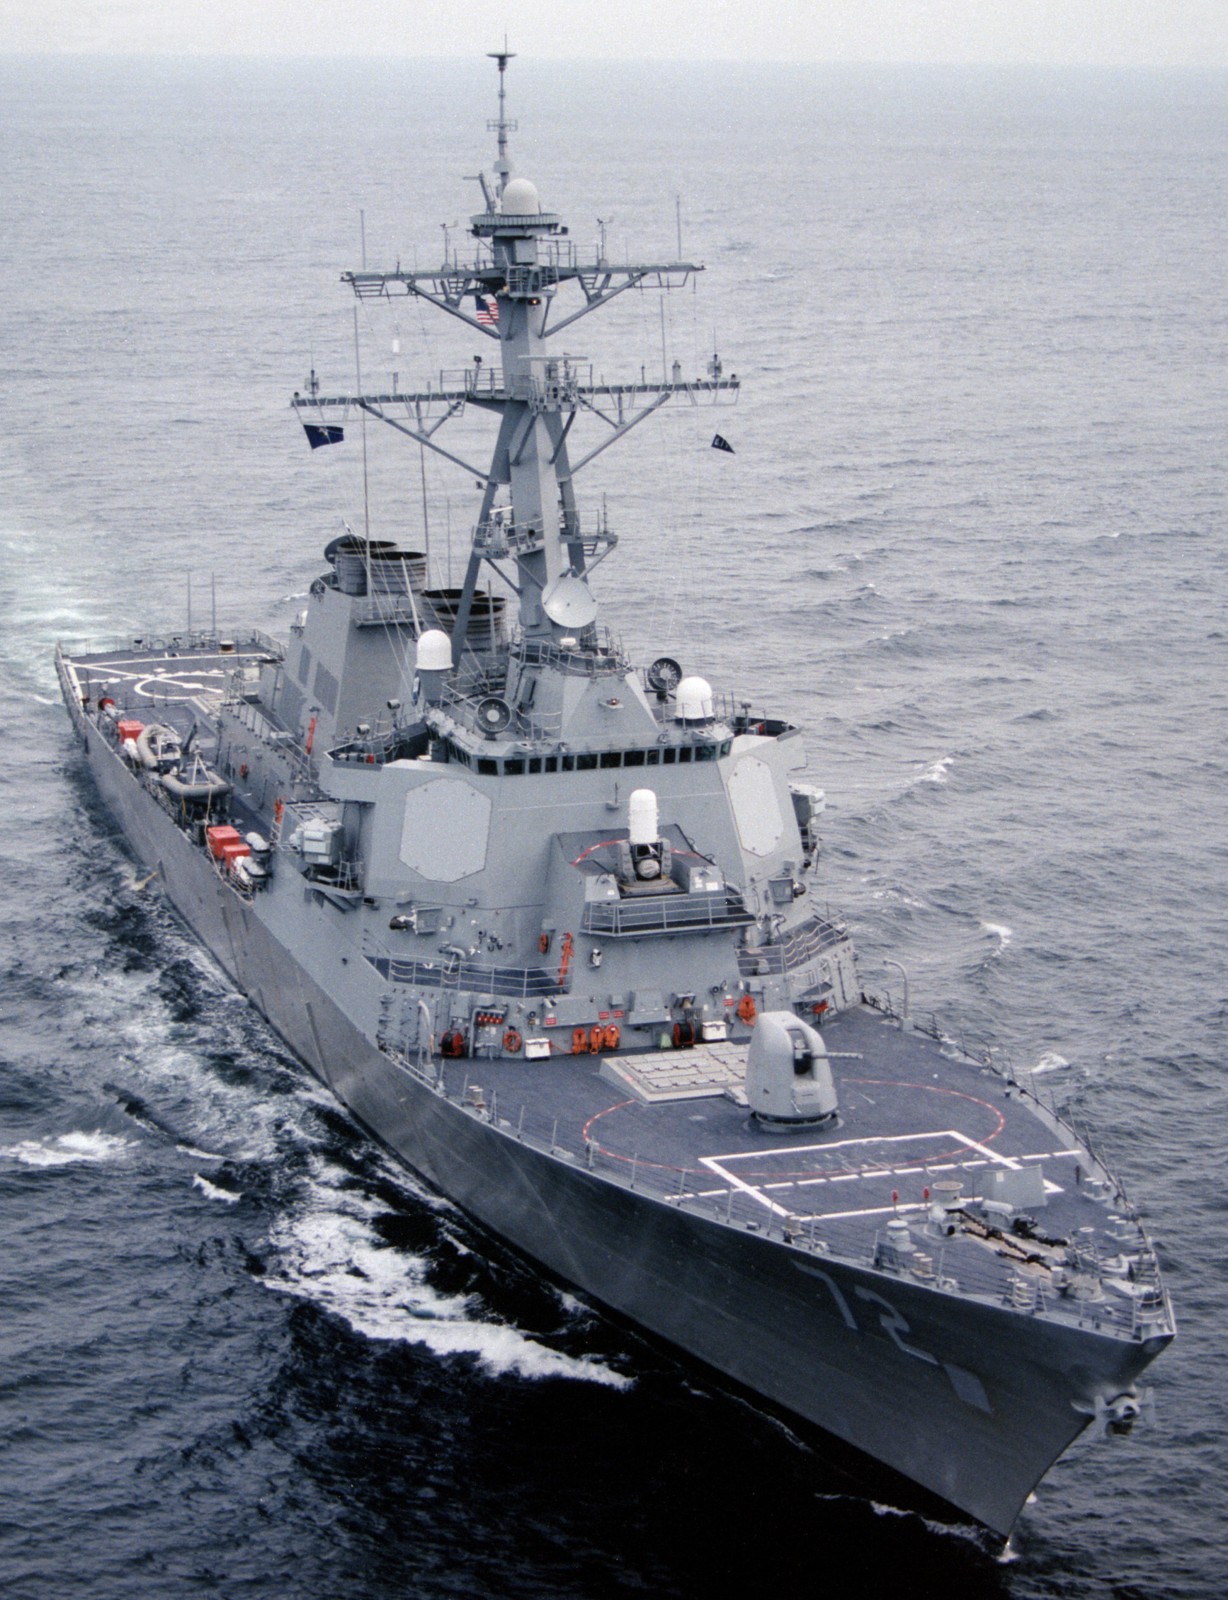 ddg-72 uss mahan guided missile destroyer arleigh burke class aegis bmd 52 trials 1997